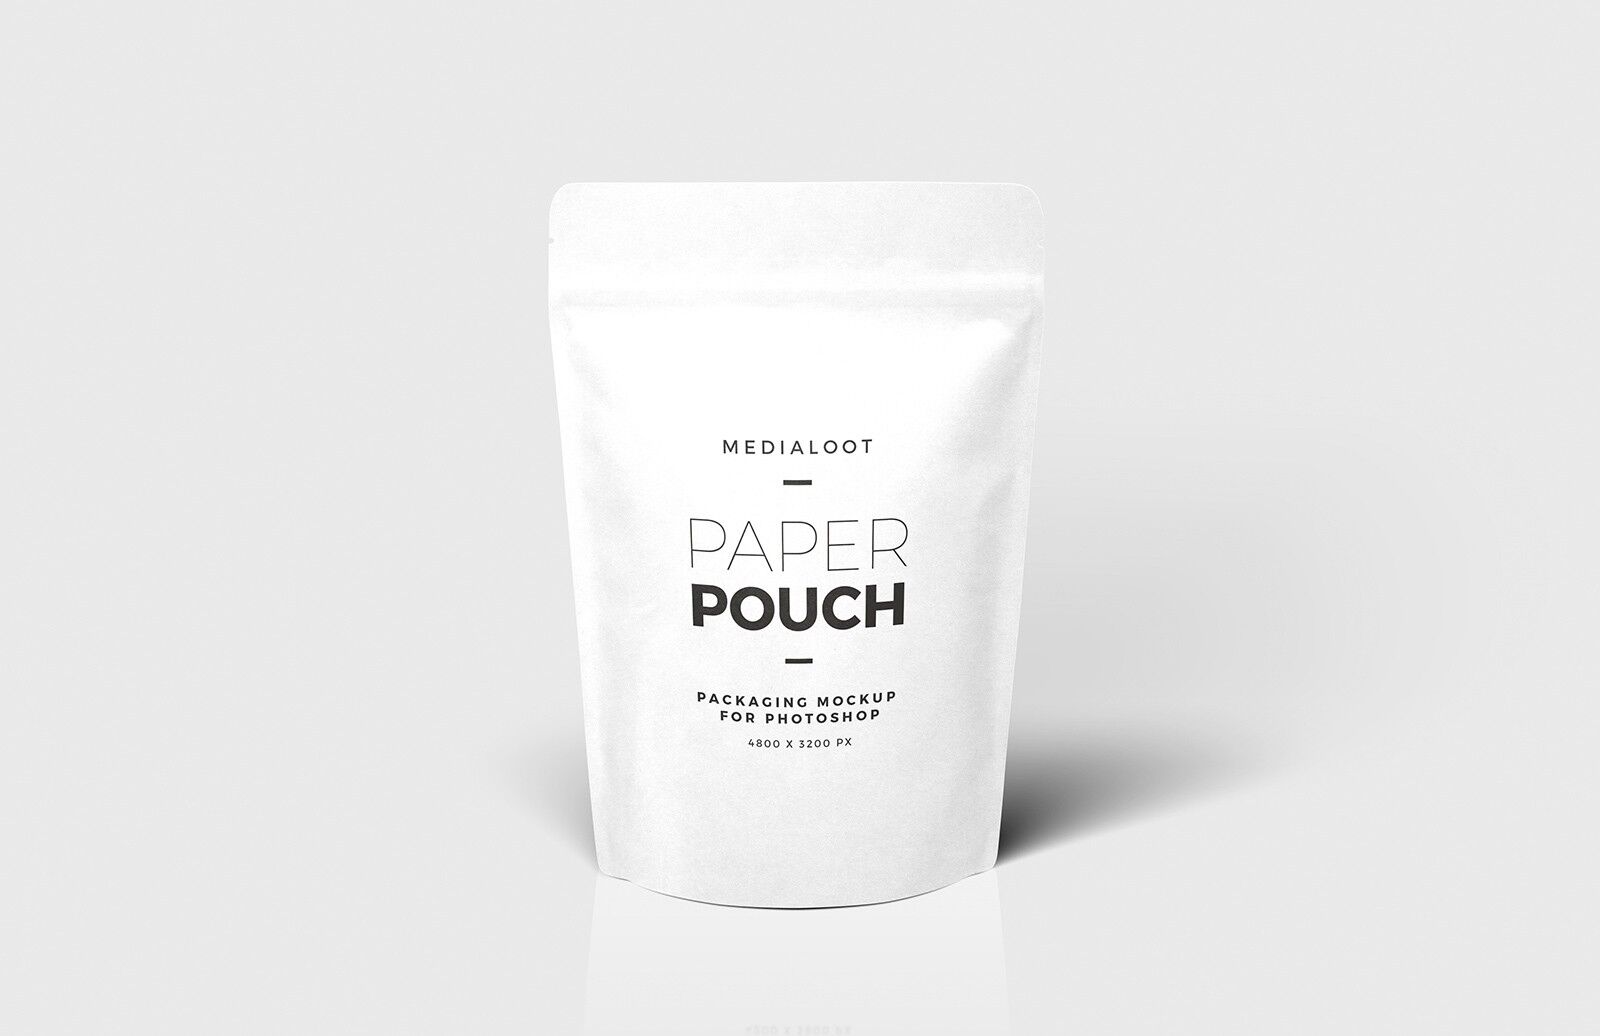 Zip Paper Pouch Packaging Mockup Design FREE PSD